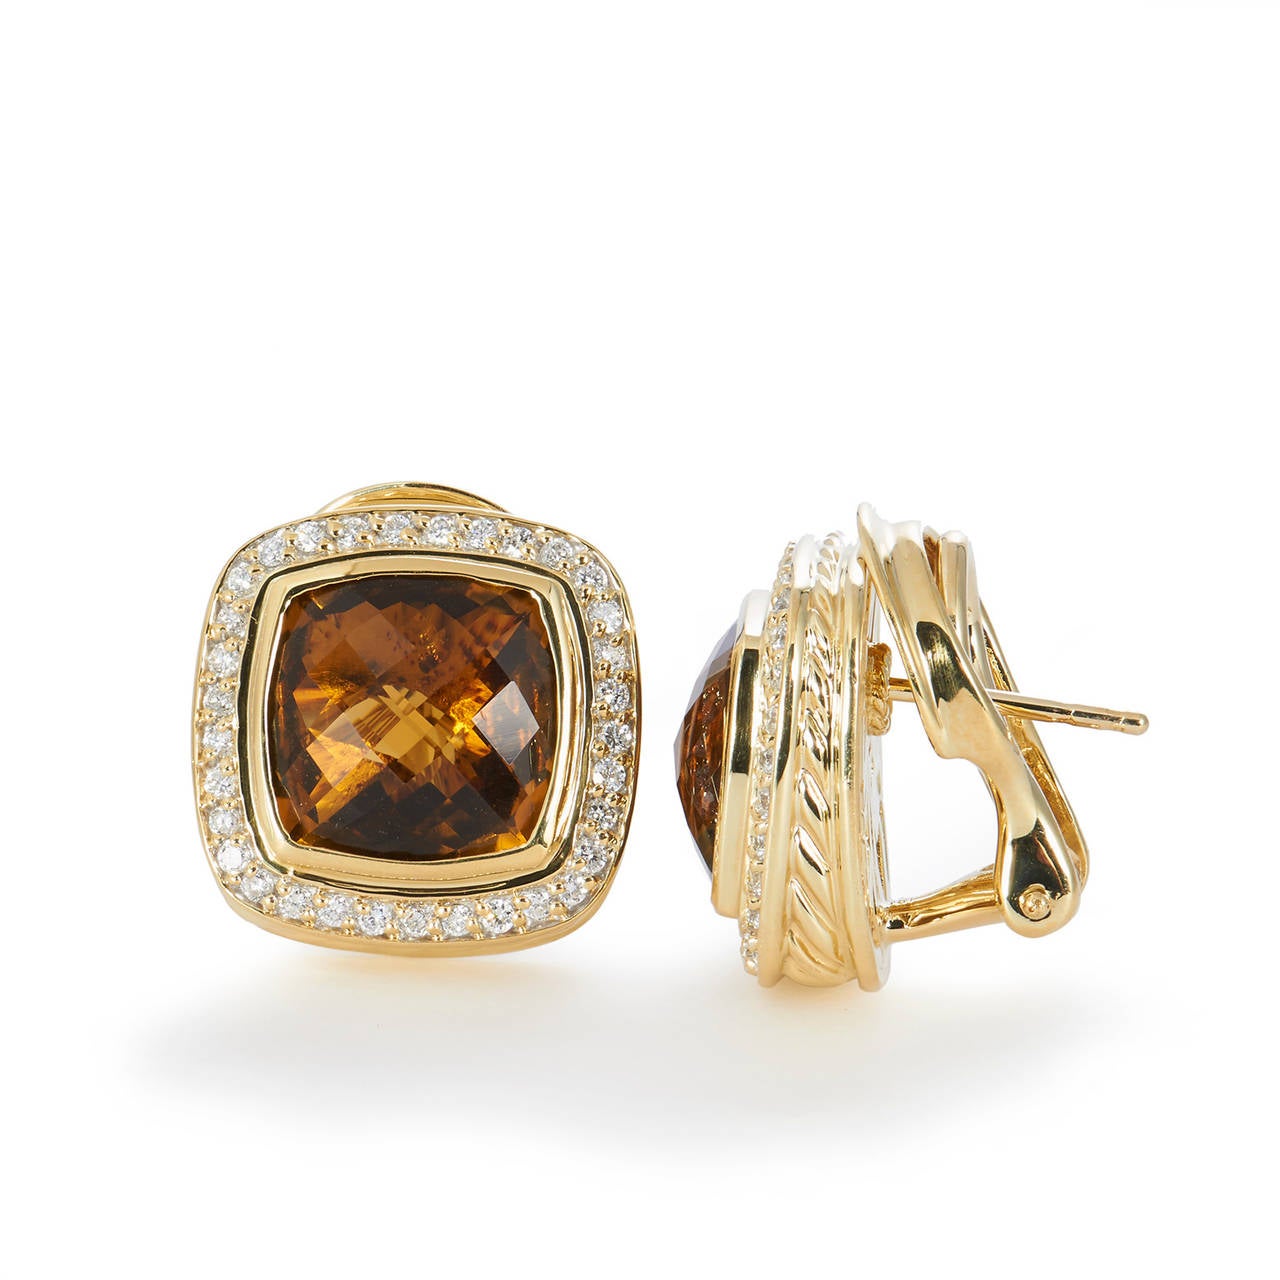 This stunning and sophisticated pair of earrings are a part the most recognized and iconic designs of David Yurman, the Albion collection. Crafted in 18K yellow gold, the set displays approximately 11 mm of checkerboard cushion cut Citrine as the